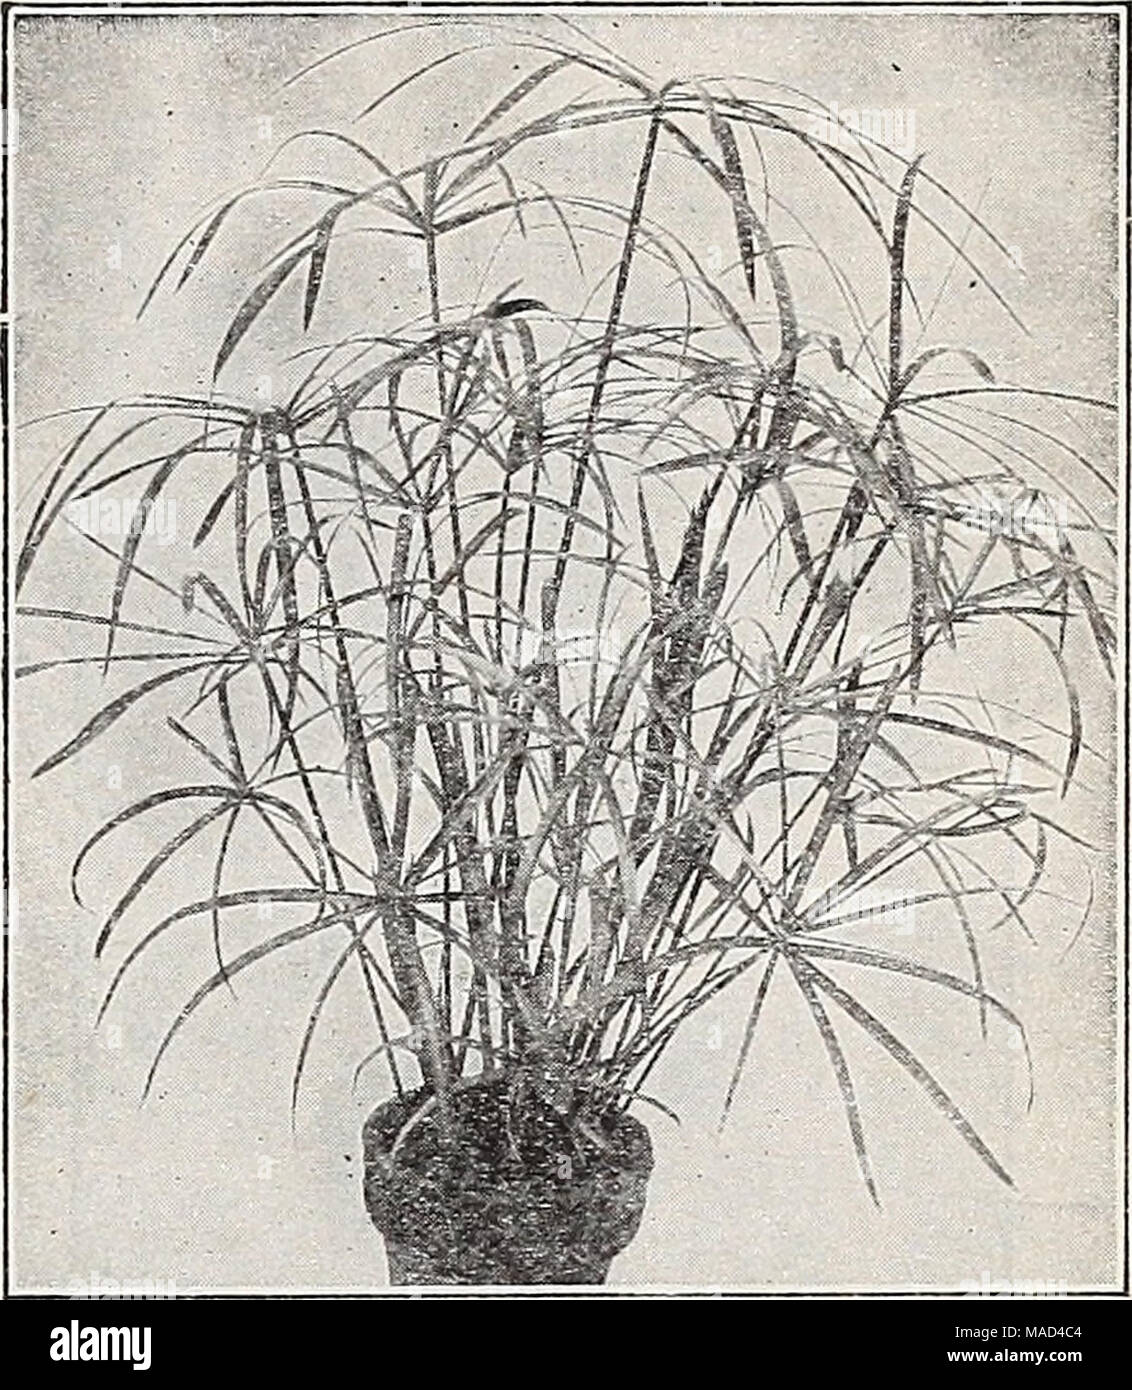 . Dreer's wholesale catalog for florists and market gardeners : autumn 1941 edition . Cyperus alternifolius Alternifolius. Cyperus 4-inch pots 21c each; Dish Gardens $18.00 per 100. An attractive assortment from 50c to $2,00 each. Goclseffiana. Sauderiana. Dracaenas Each 2%-inch pots $0 23 2-inch pots 18 Per 100 Per 1000 $20 00 $190 00 15 00 140 00 Euonymus radicans variegatus 1%-inch pots 7c each; $6.00 per 100; $55.00 per 1000. 2%-inch pots 14g each; $12.00 per 100; $110.00 per 1000. Euphorbia fulgens—Scarlet Plume Erroneously called jacquinifolia . An excellent cut flower item as it blooms  Stock Photo